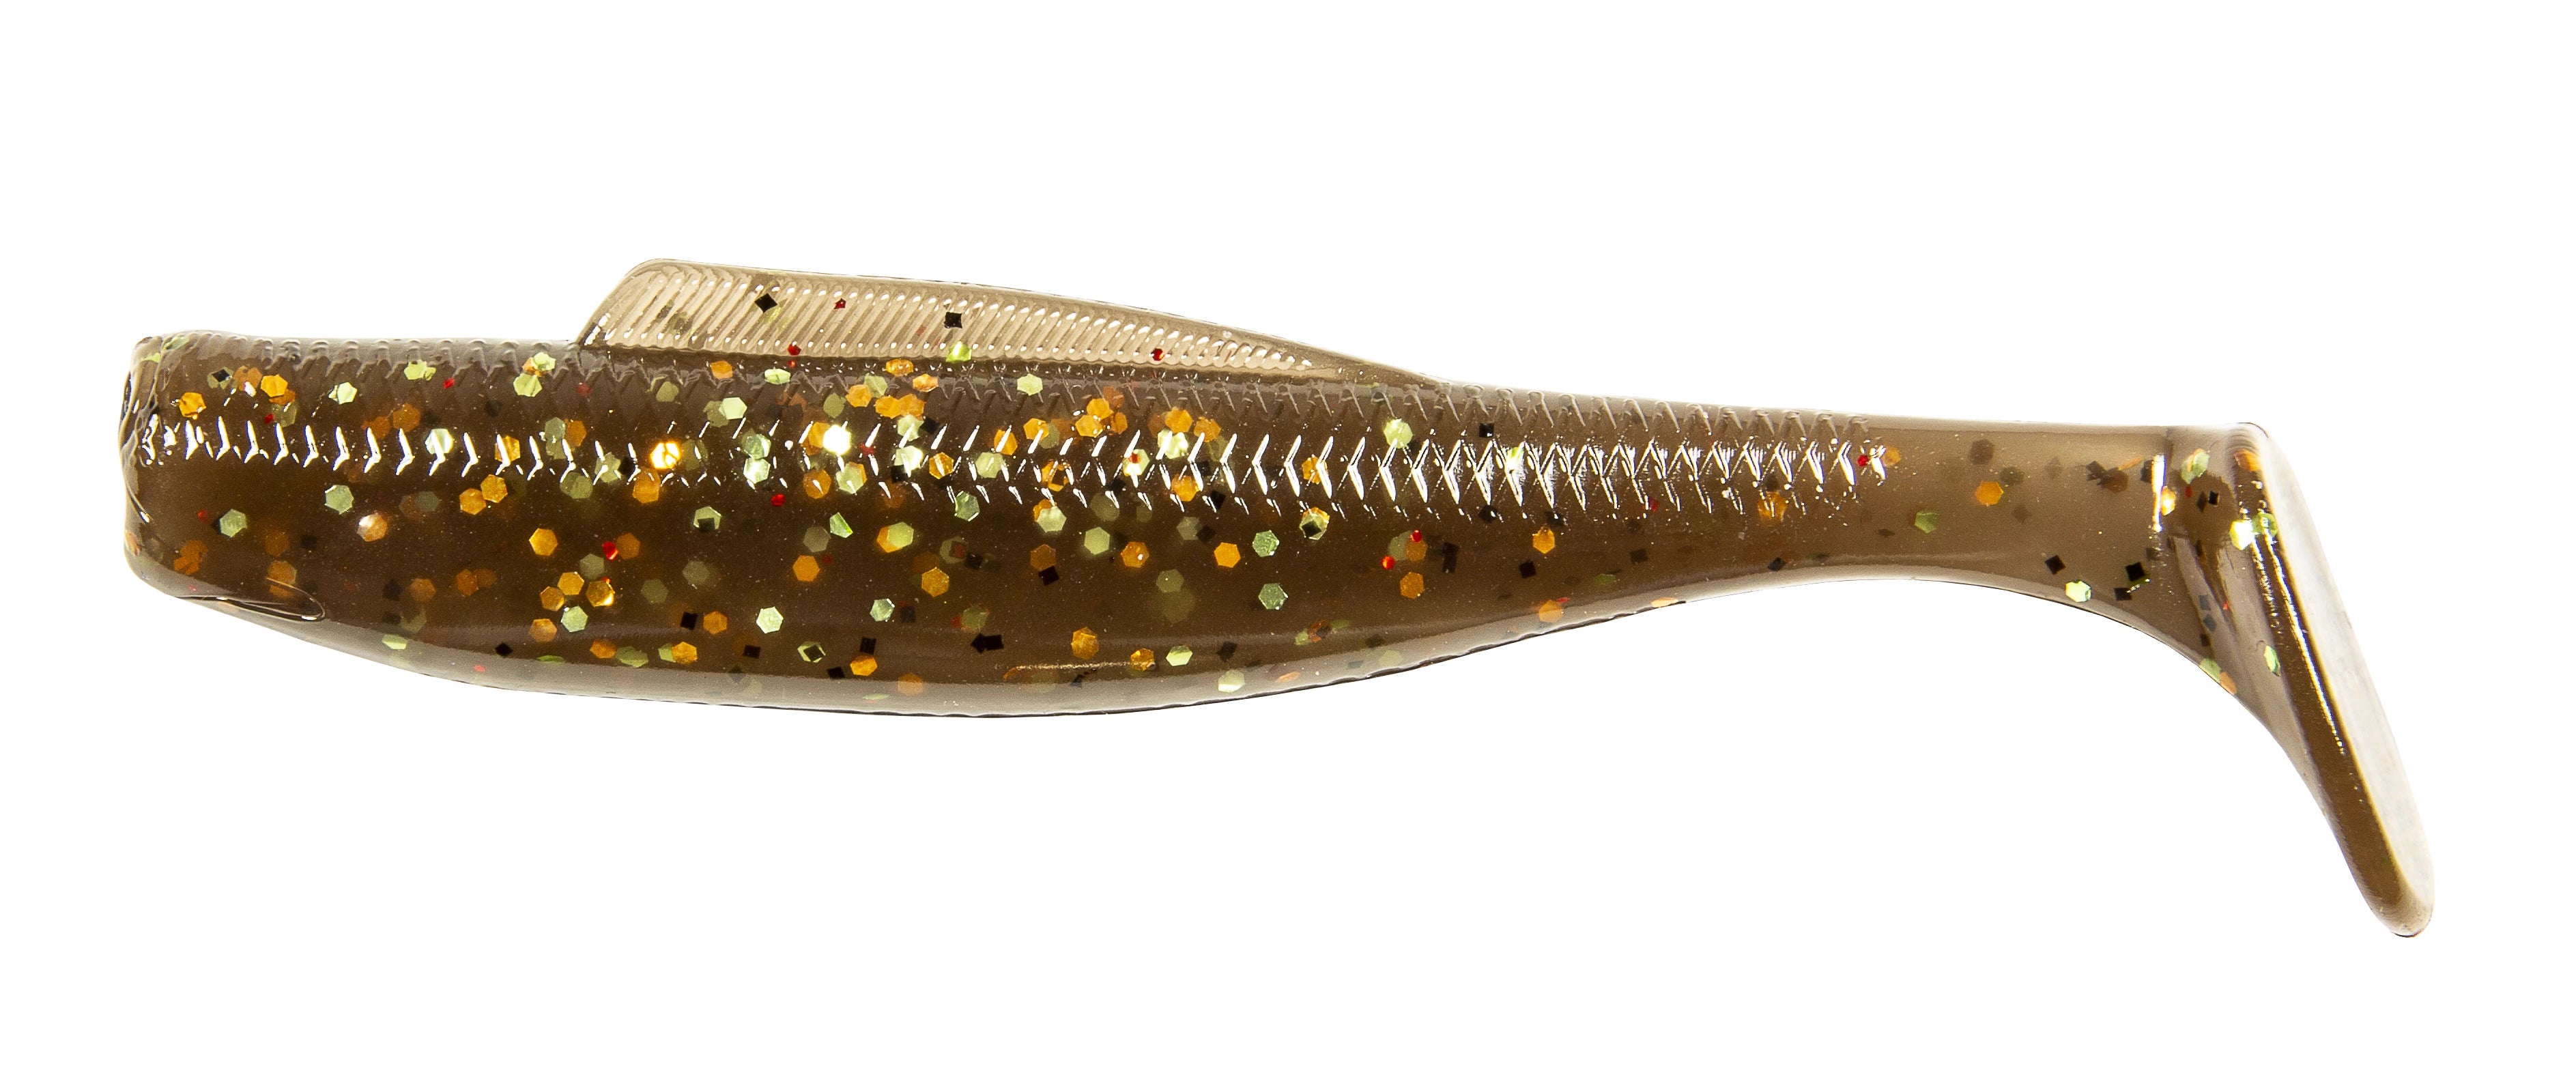 Z Man DieZel MinnowZ 4 inch Soft Paddle Tail Swimbait 5 pack — Discount  Tackle